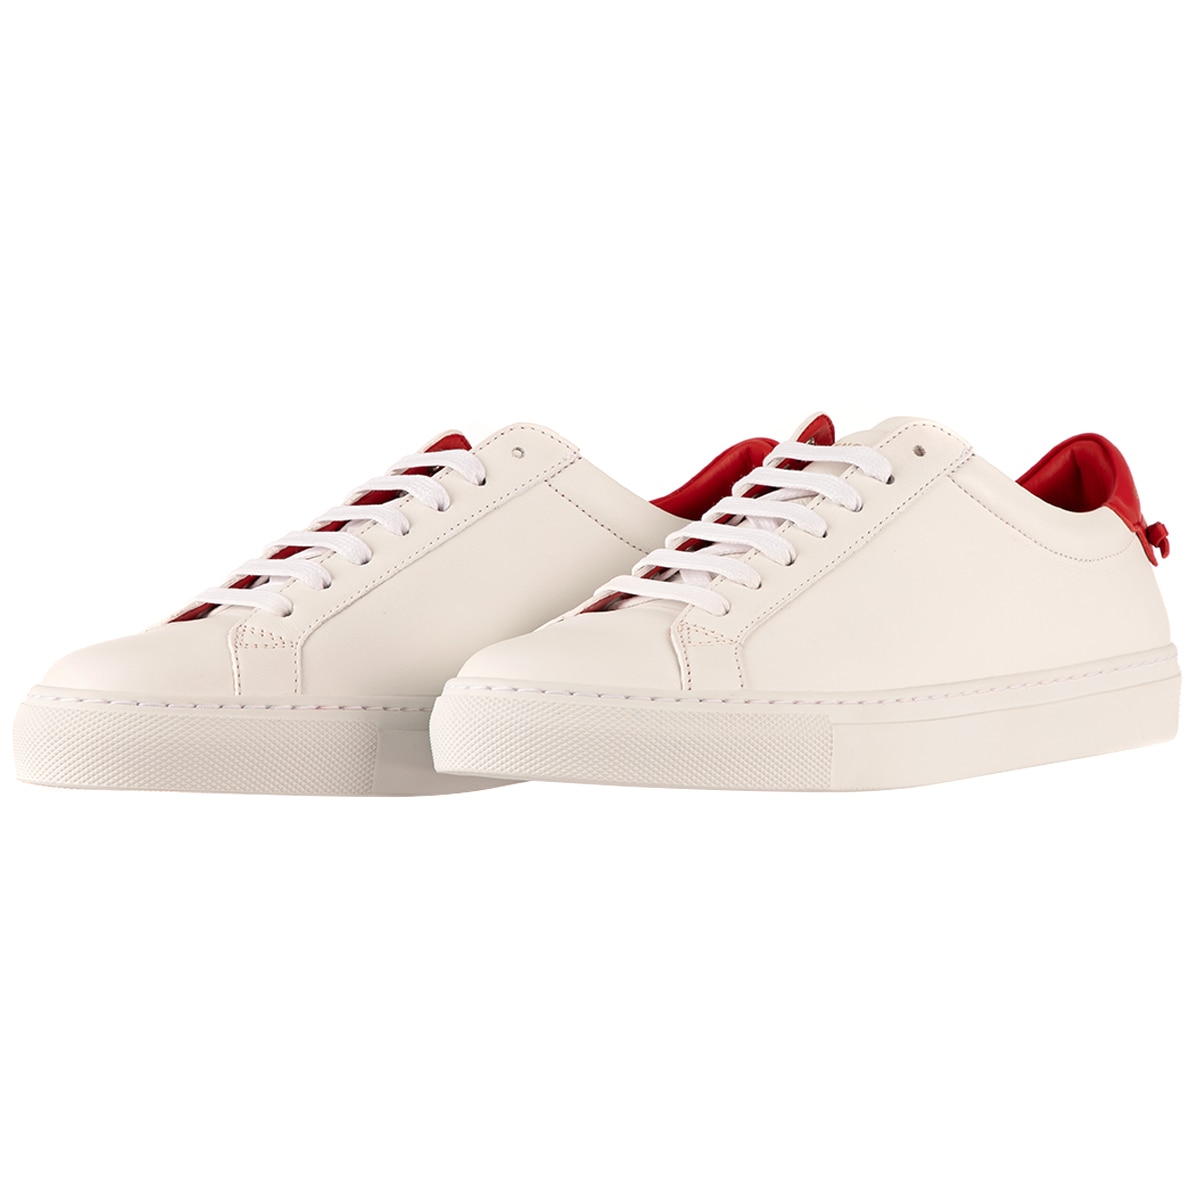 Sneakers Givenchy Women Sneakers GIVENCHY 37 white Women Shoes Givenchy Women Sneakers Givenchy Women 